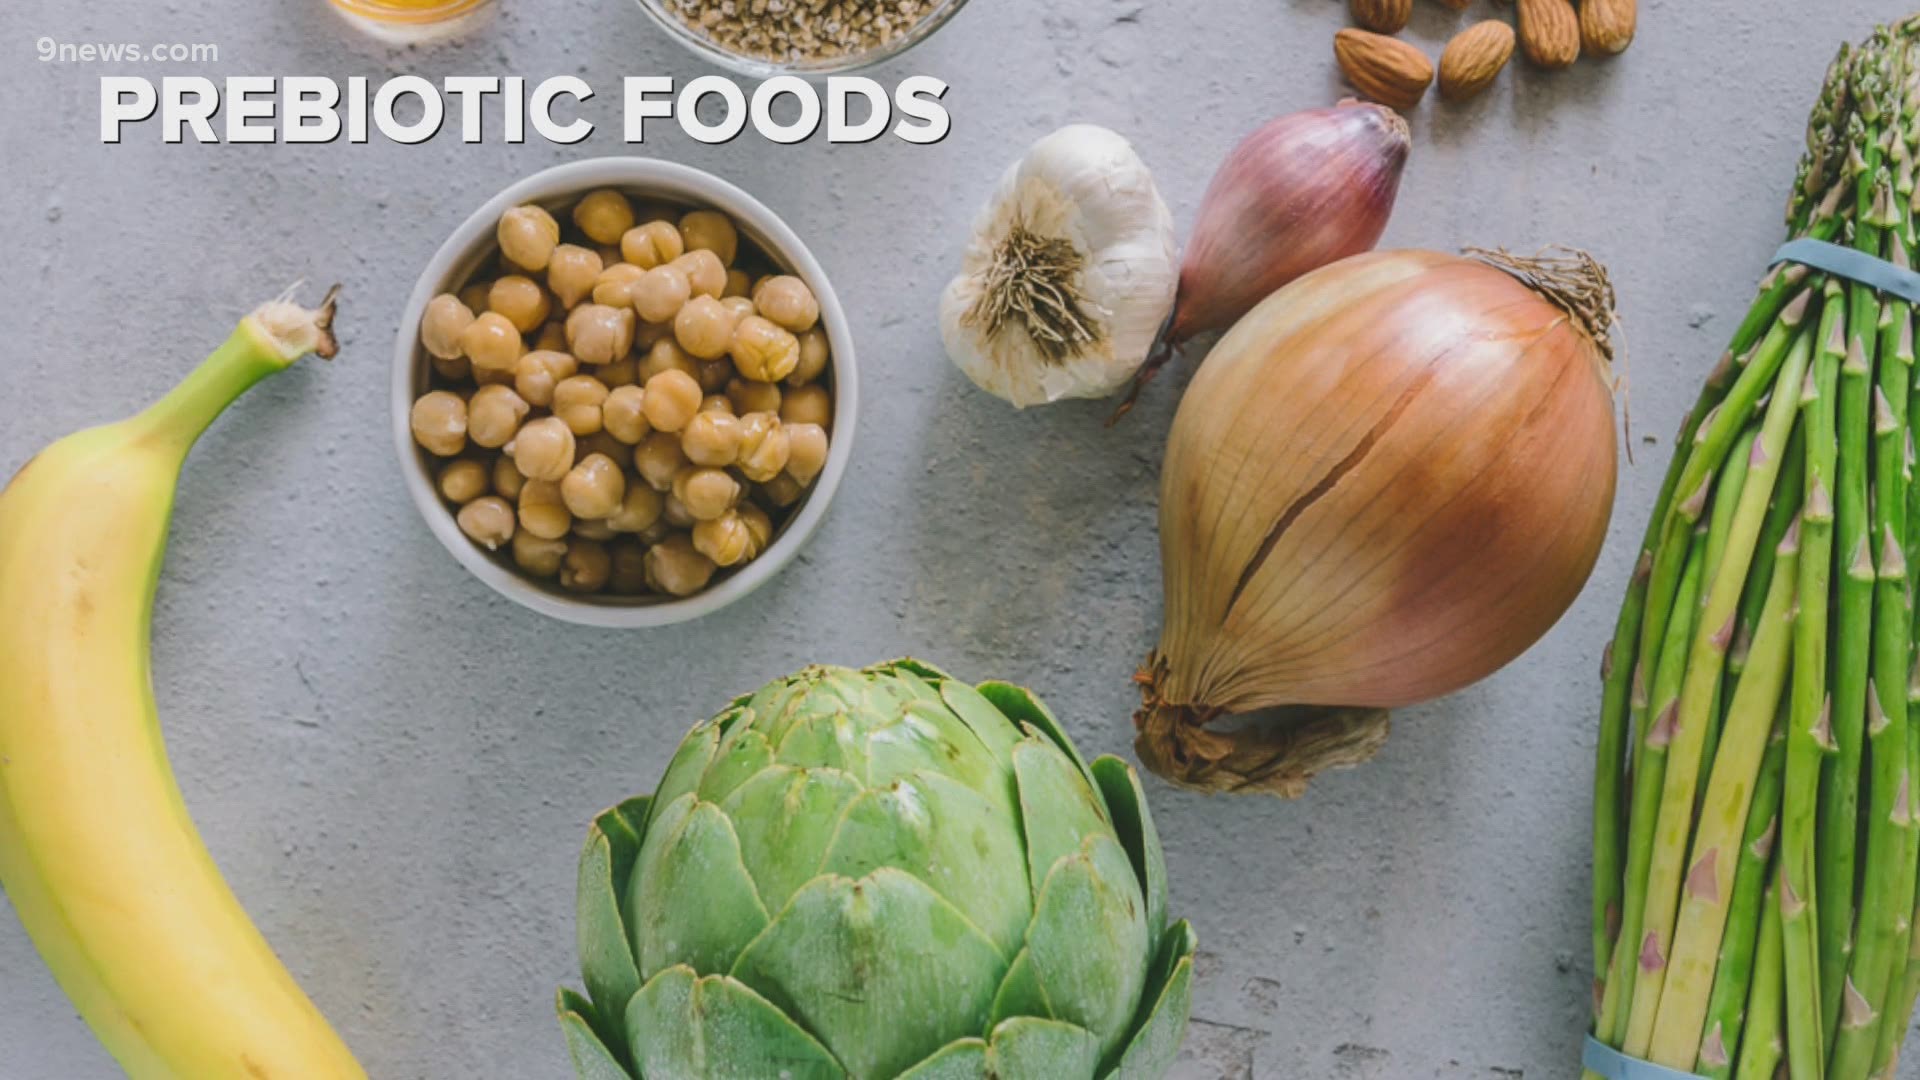 Nutrition expert Malena Perdomo shares three foods that help keep the good bacteria in our bodies in tip-top shape.